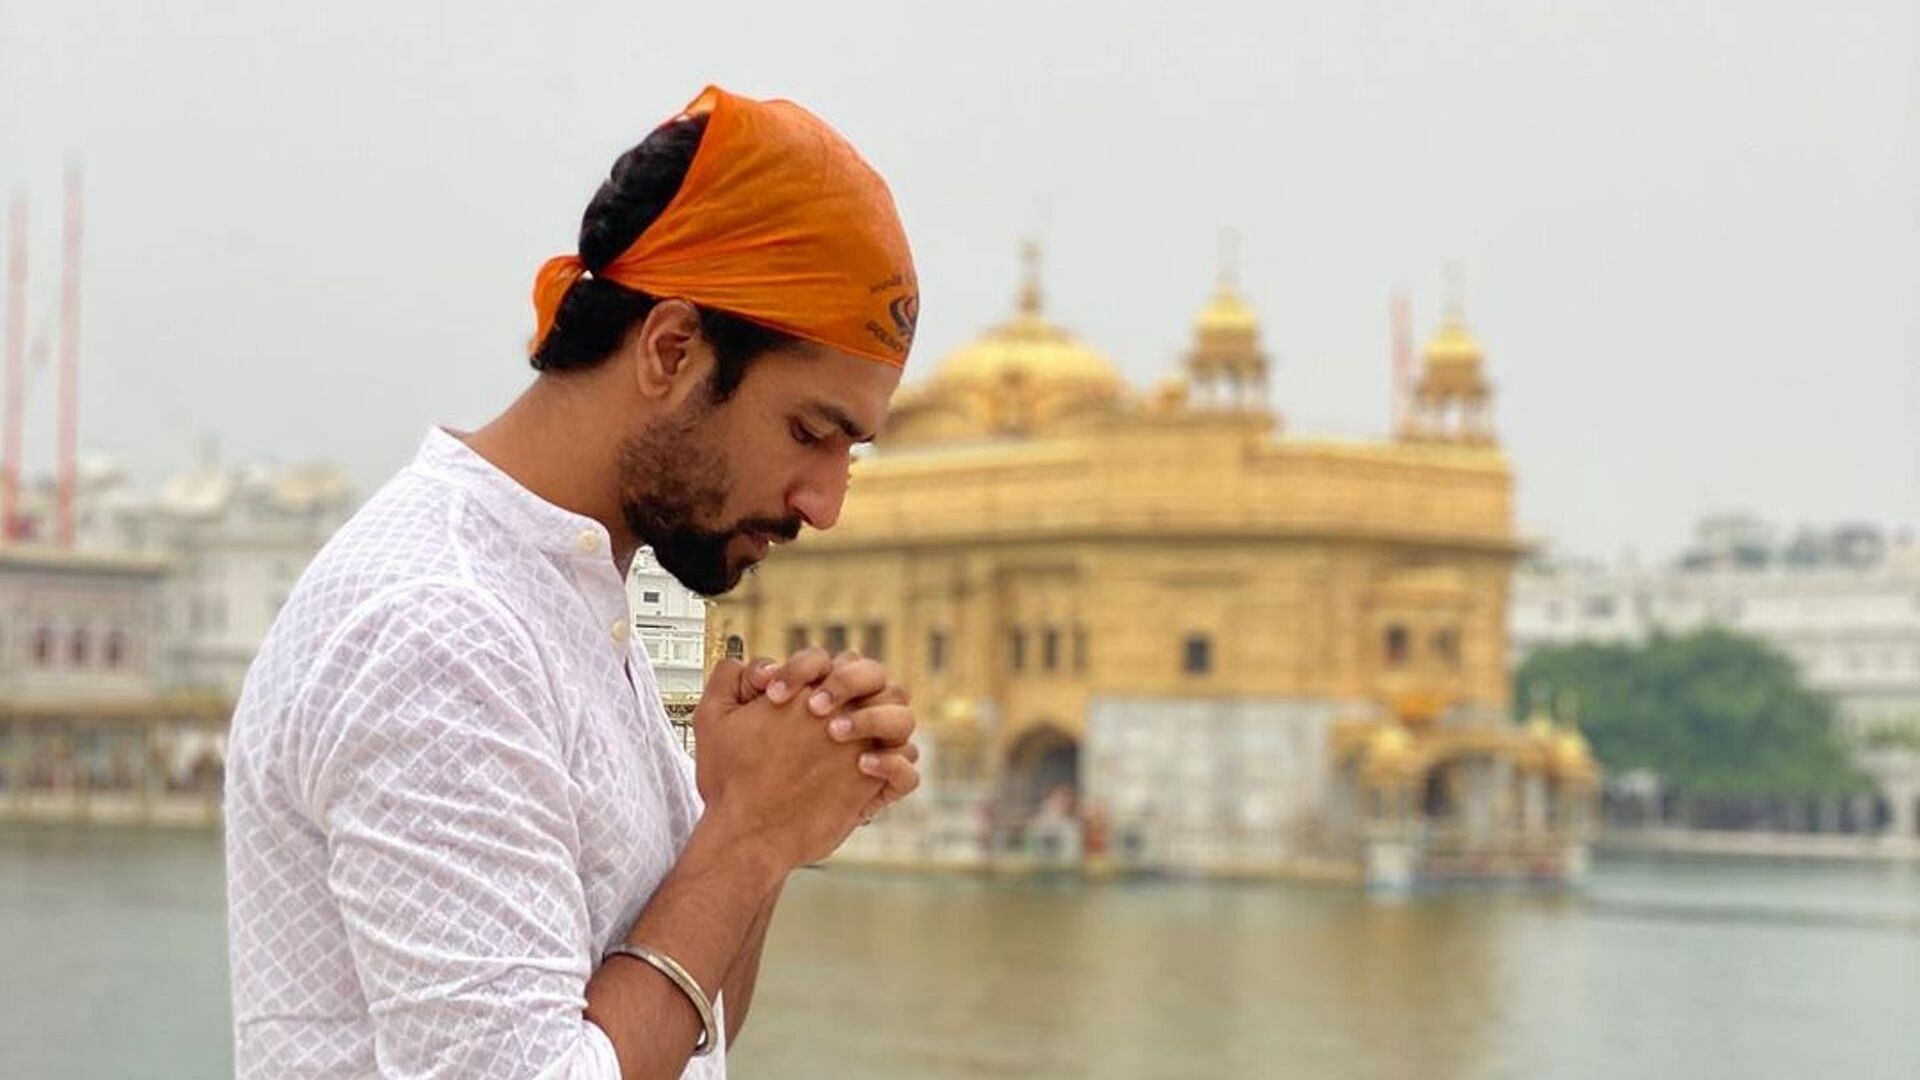 Vicky Kaushal seeks blessings at the Golden Temple in Amritsar.